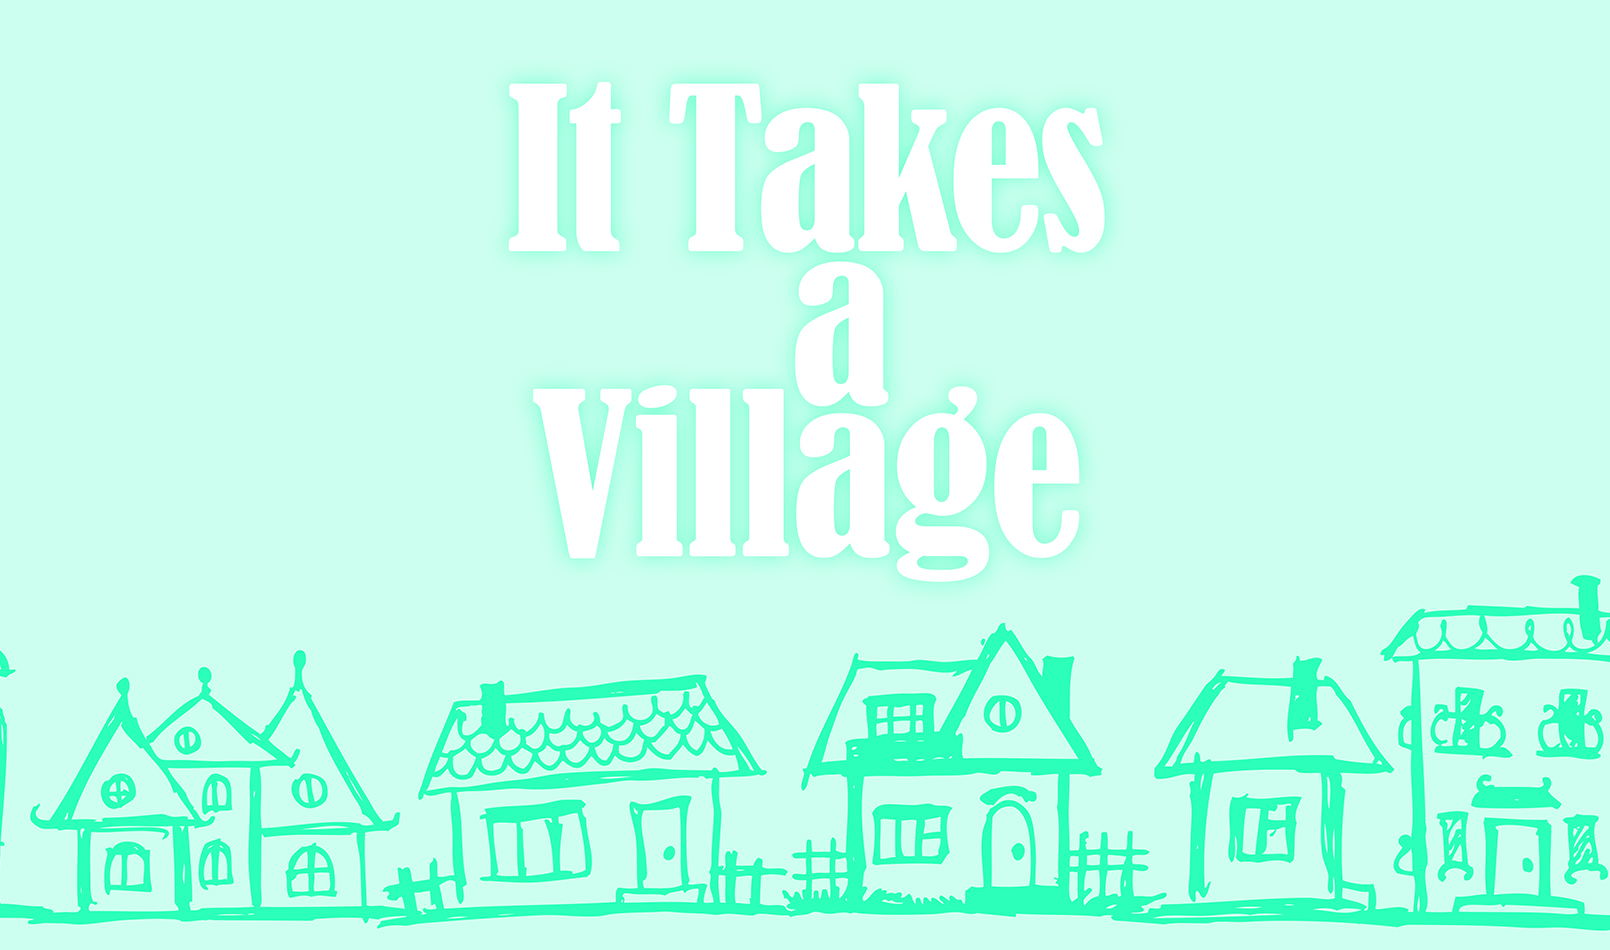 One option for senior living is Village organizations